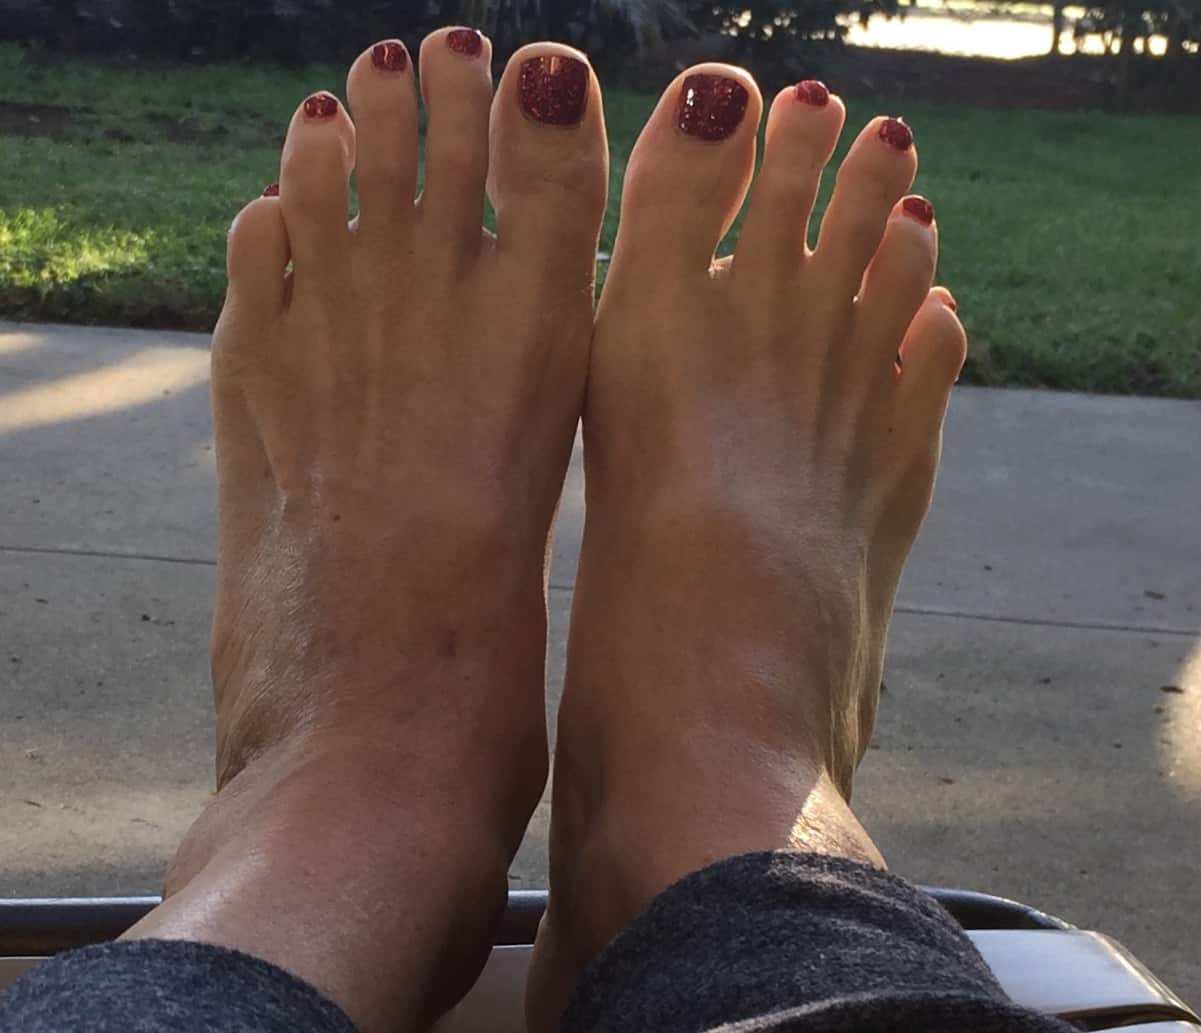 Feet lady gaga 21 Pictures